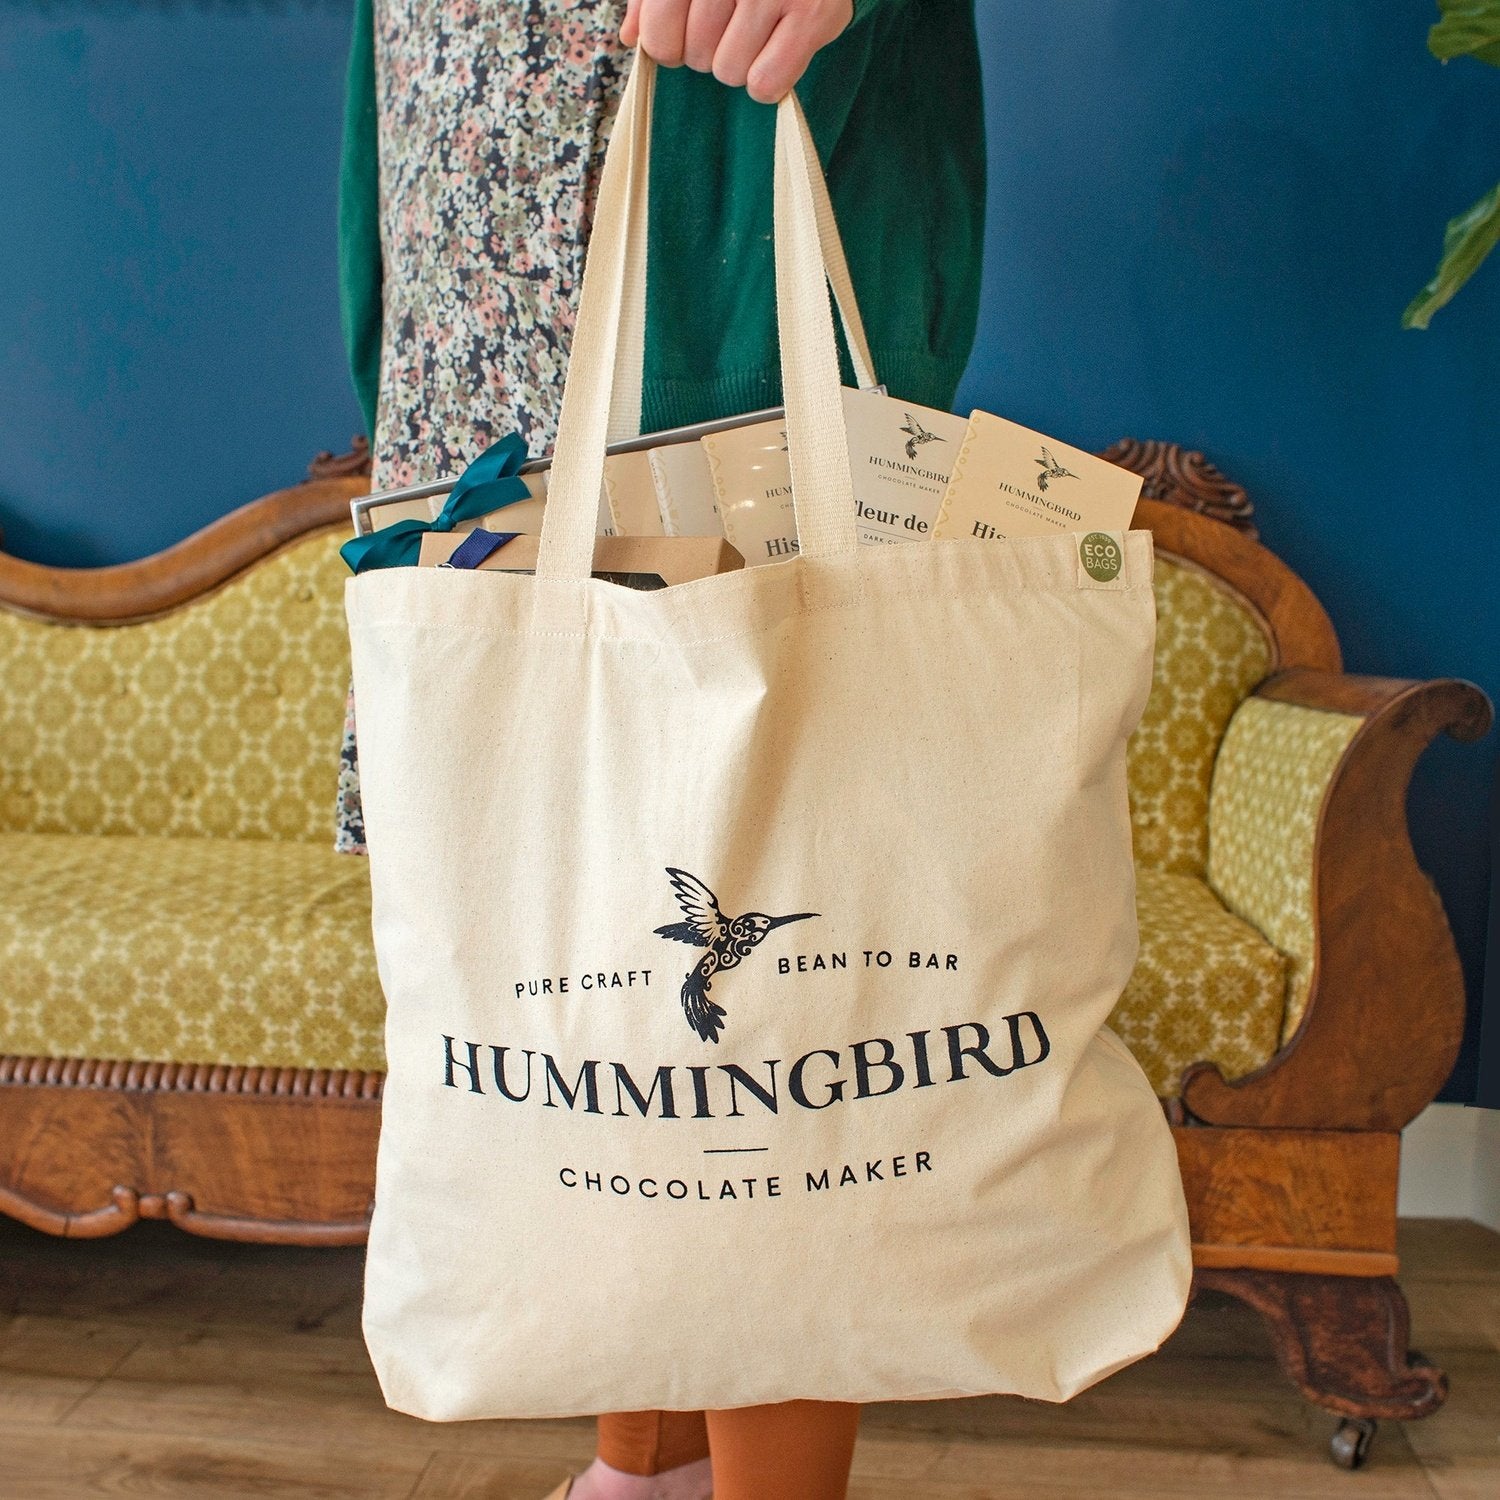 Hummingbird Chocolate Maker tote bag stuffed with bean-to-bar chocolate and being held by the handles